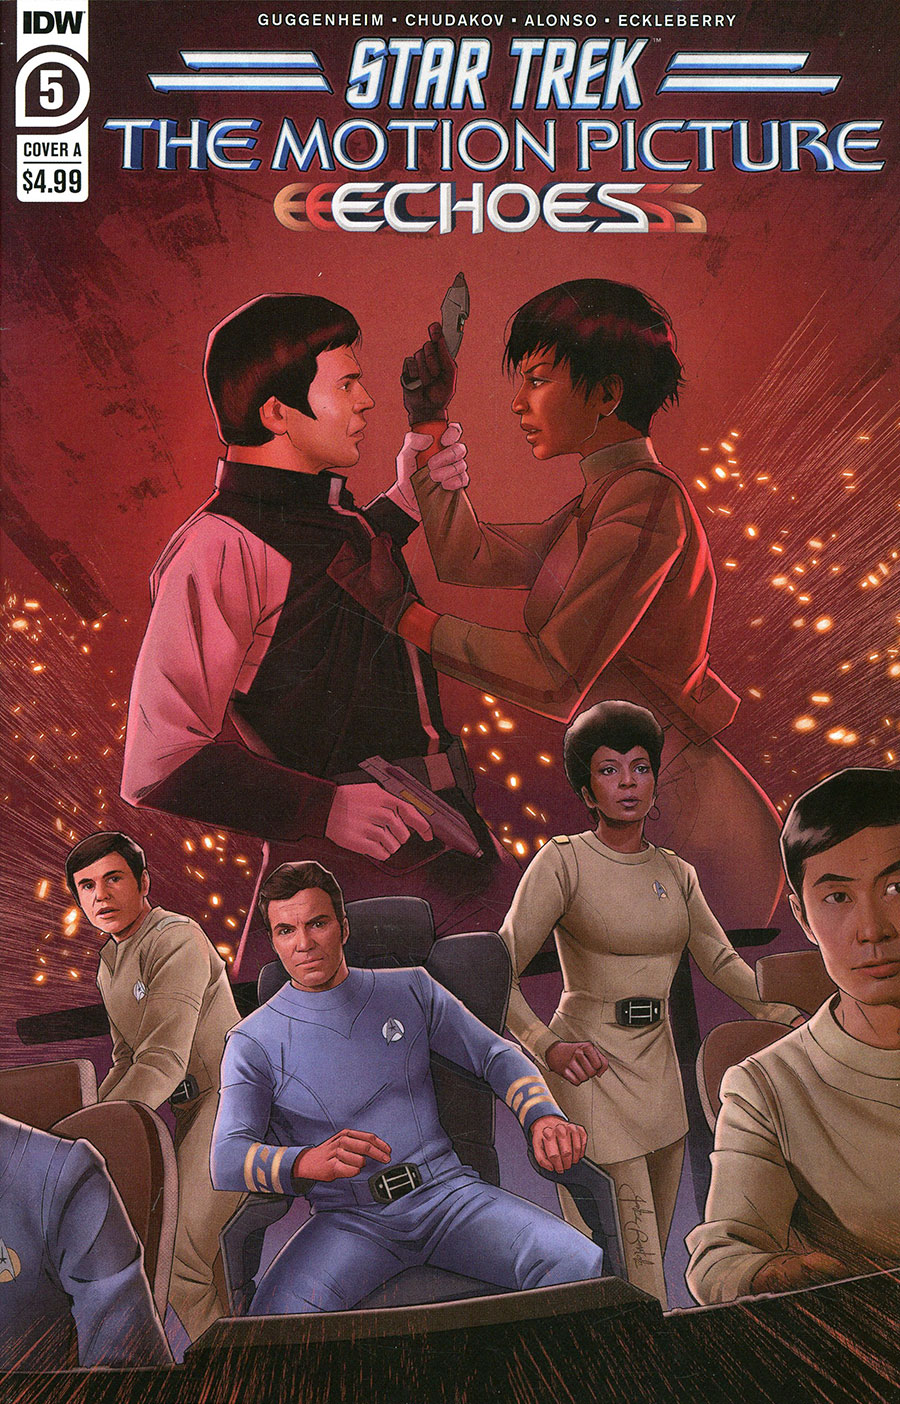 Star Trek The Motion Picture Echoes #5 Cover A Regular Jake Bartok Cover